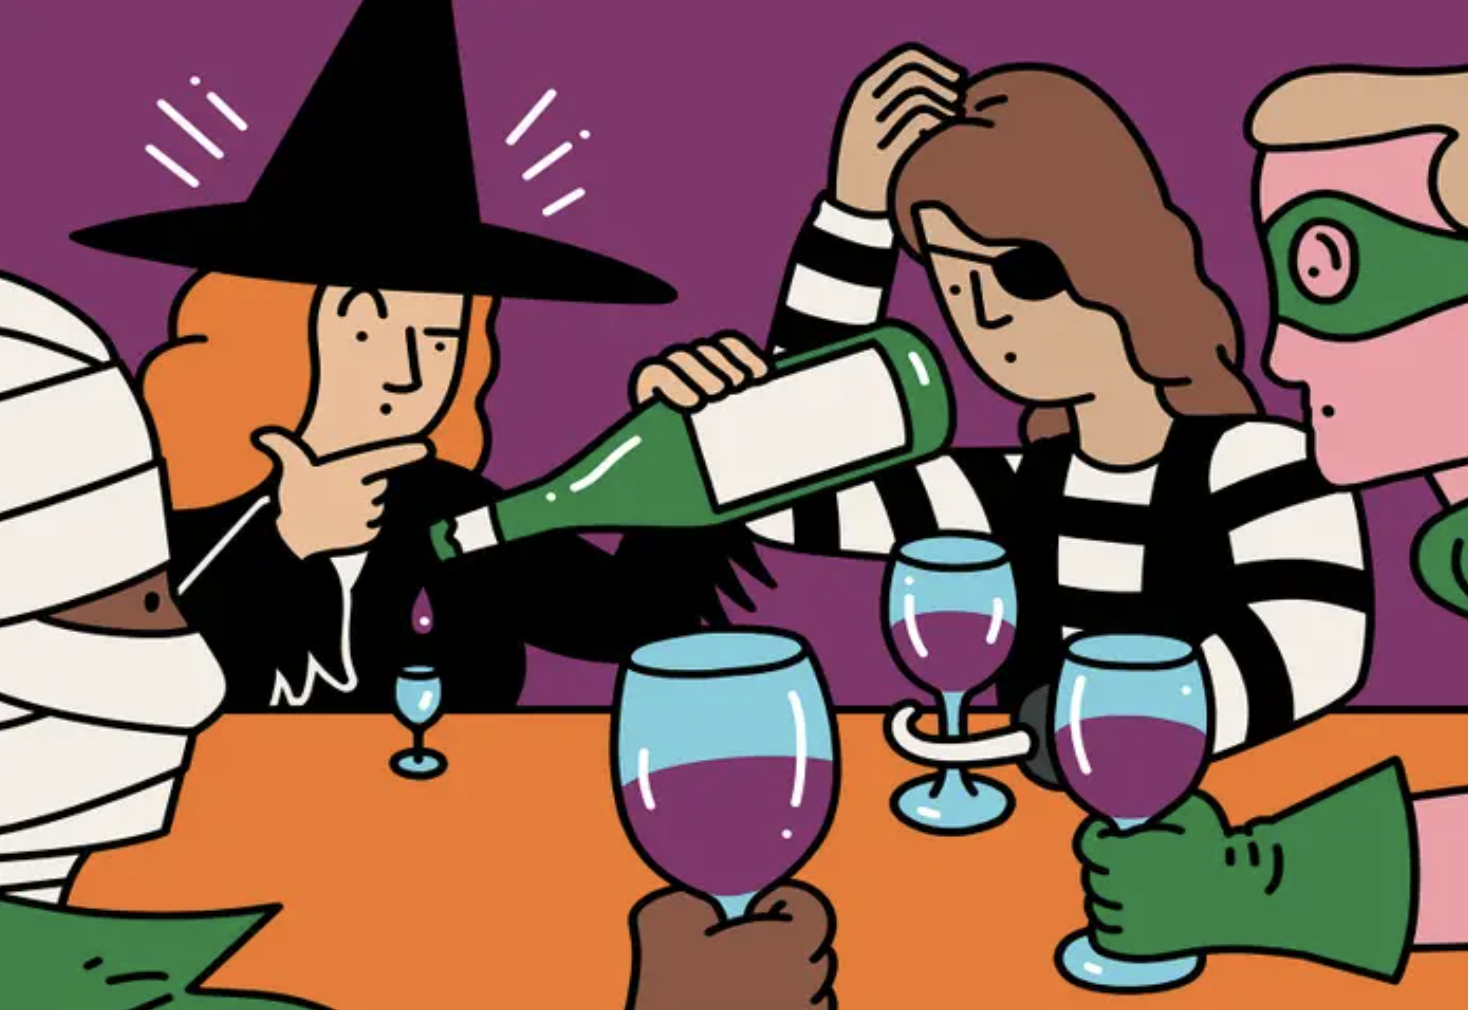 an illustration of a witch and a pirate sitting at a table with drinks